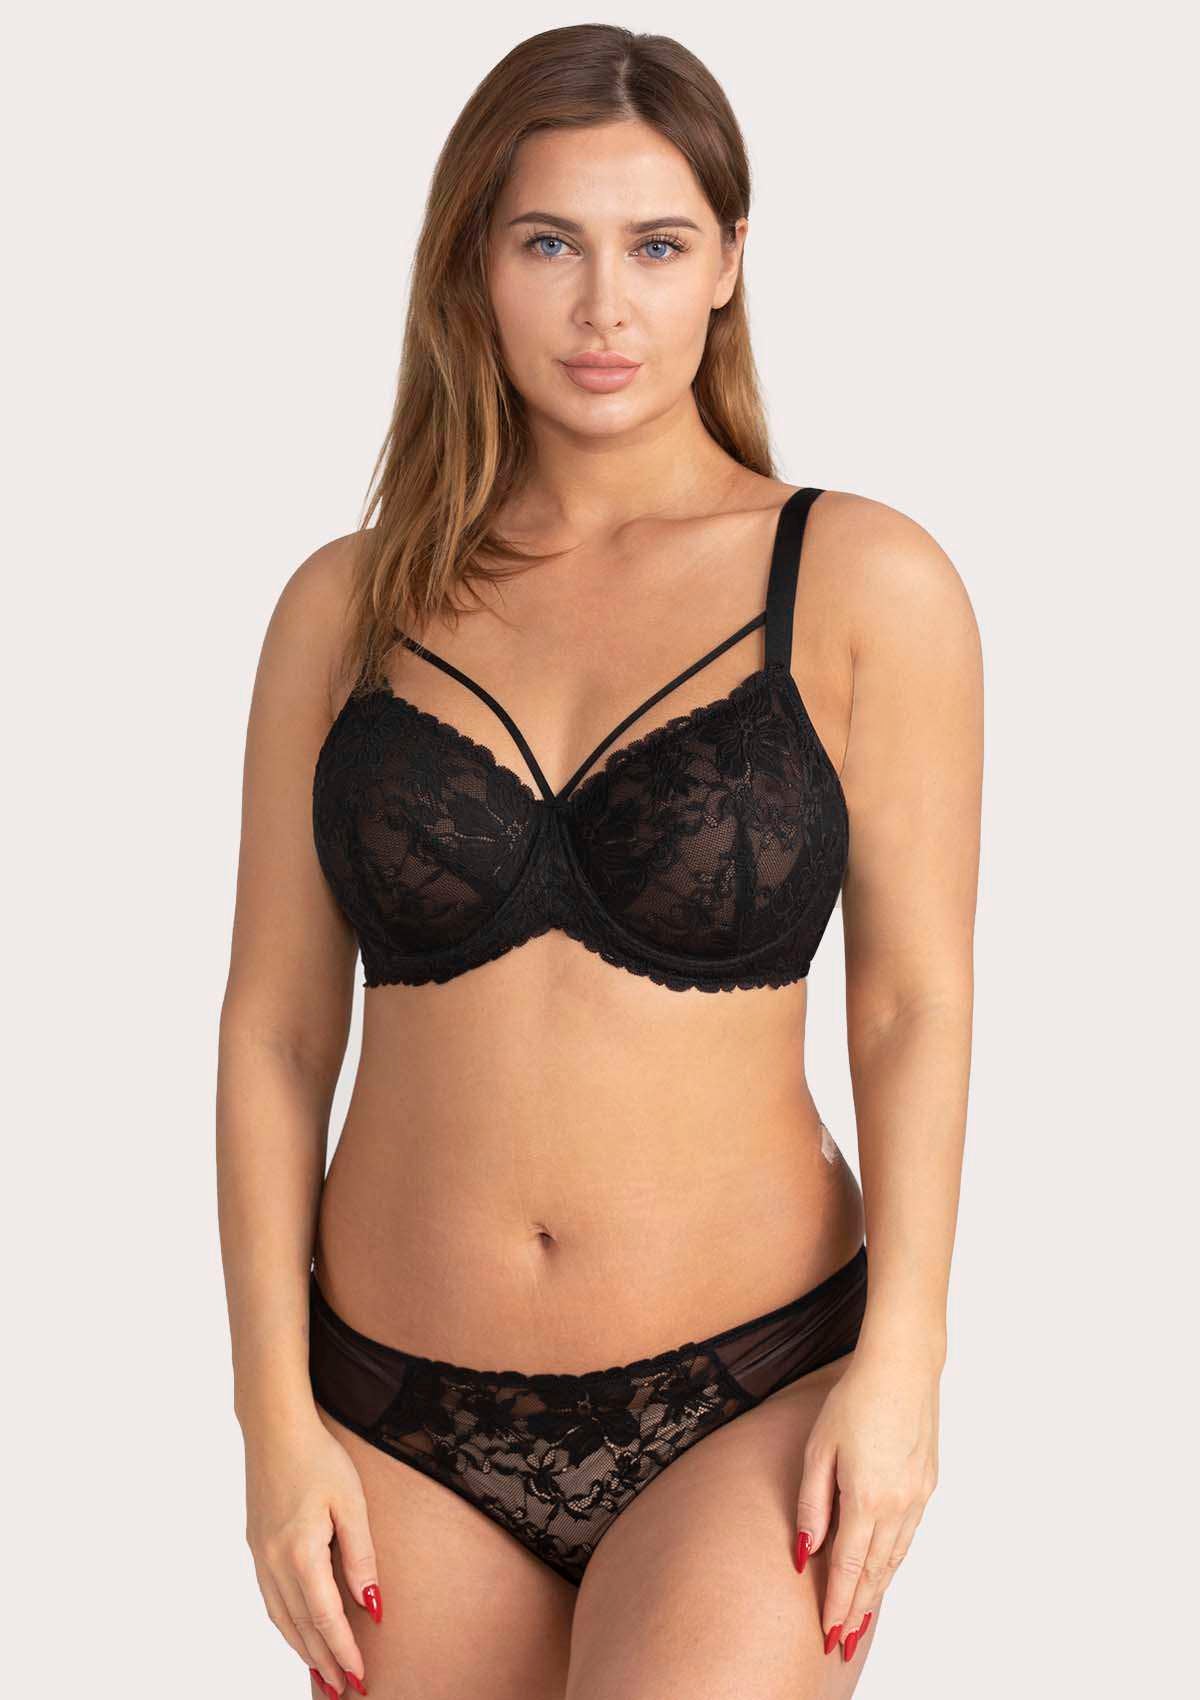 HSIA Pretty In Petals Lace Bra And Panty Set: Non Padded Wired Bra - Black / 32 / B